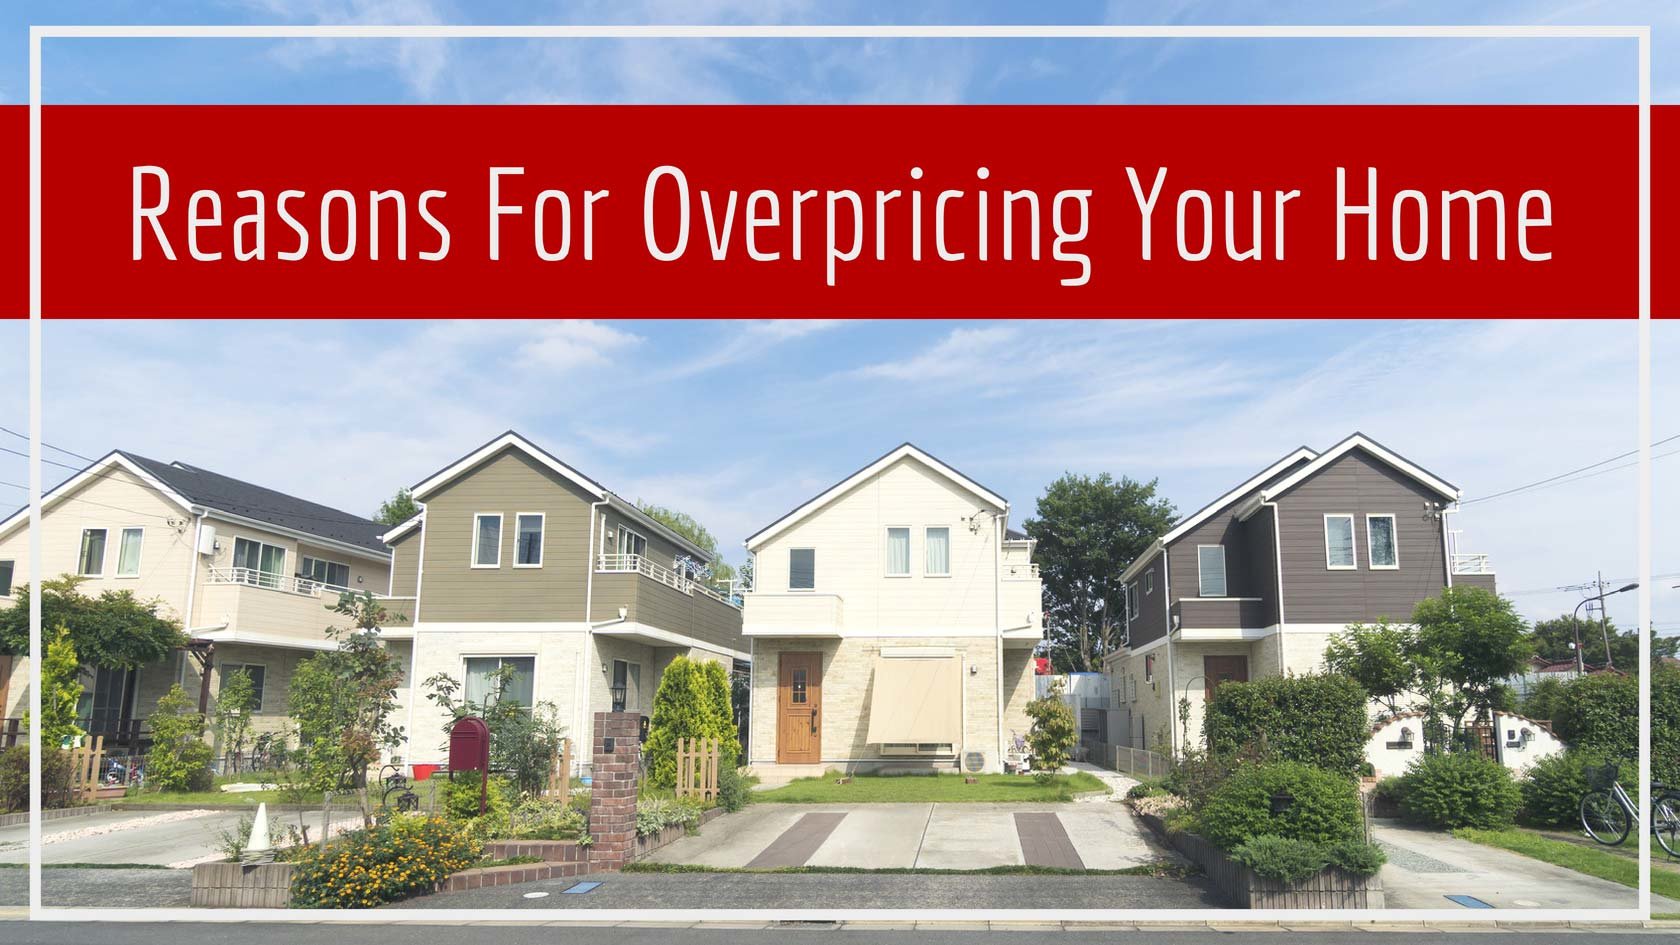 When Homeowners Overprice Their Homes